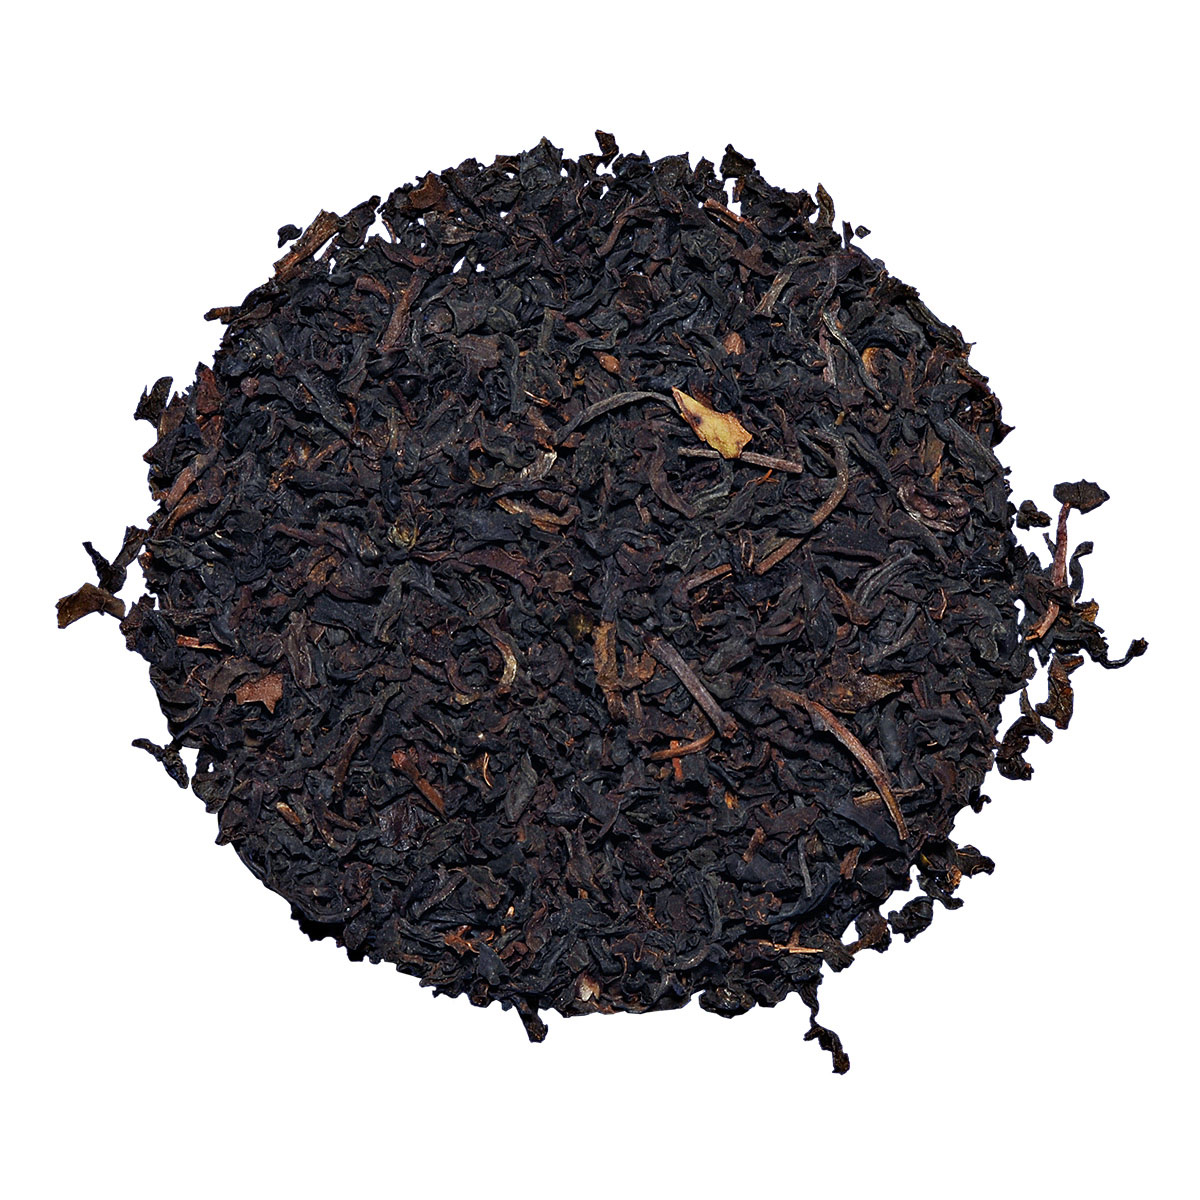 Picture of Organic Ceylon Loose Leaf Tea from the English Tea Store